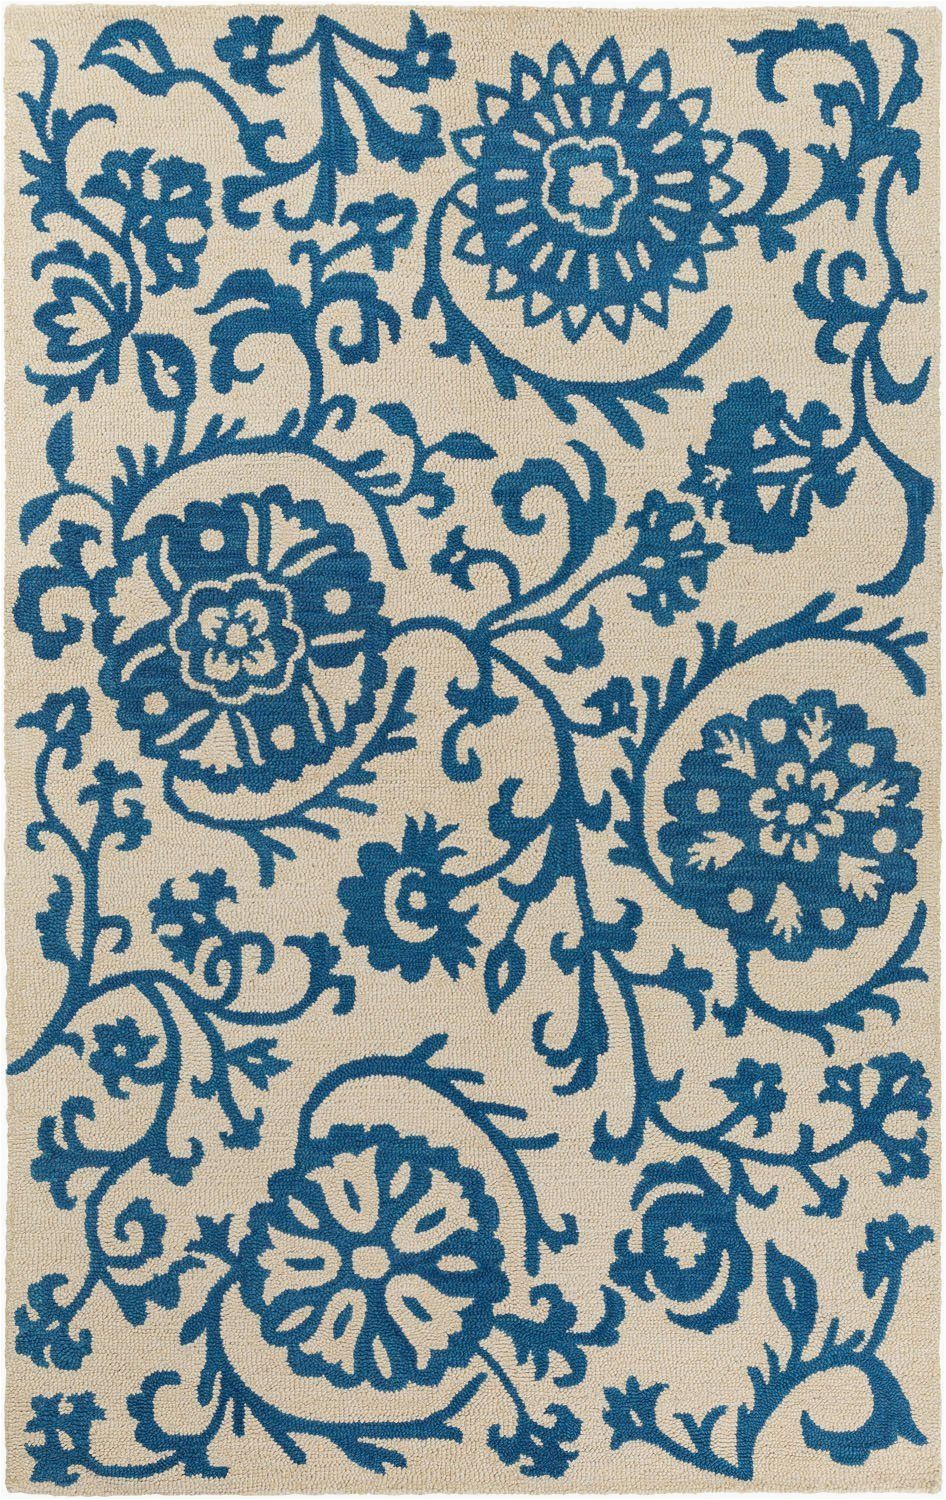 Royal Blue and White area Rugs Rhodes Rds 2314 Royal Blue F White Floral Rug